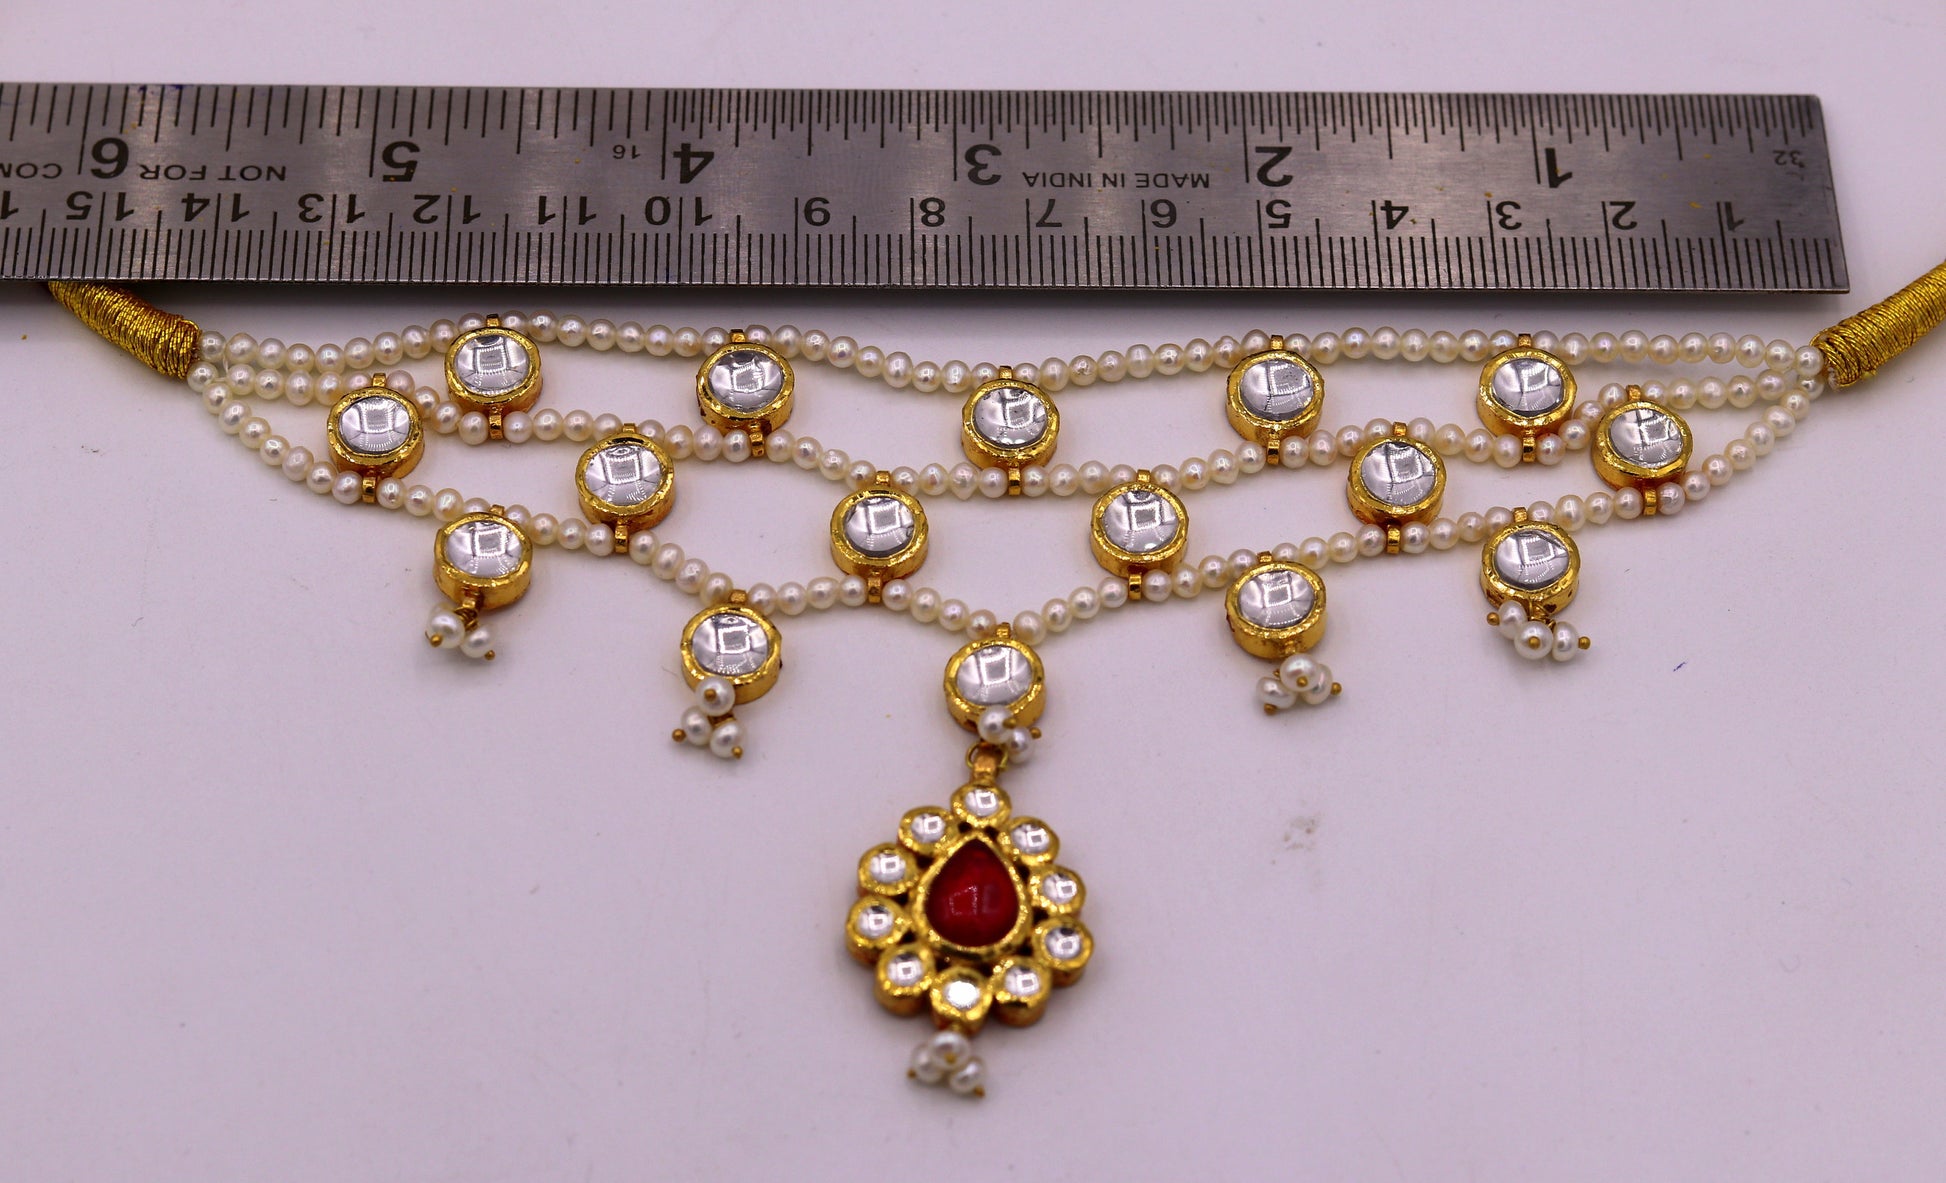 22K yellow gold handmade traditional Rajput antique style solid gold necklace with gorgeous tiny peal stone from Rajasthan India - TRIBAL ORNAMENTS